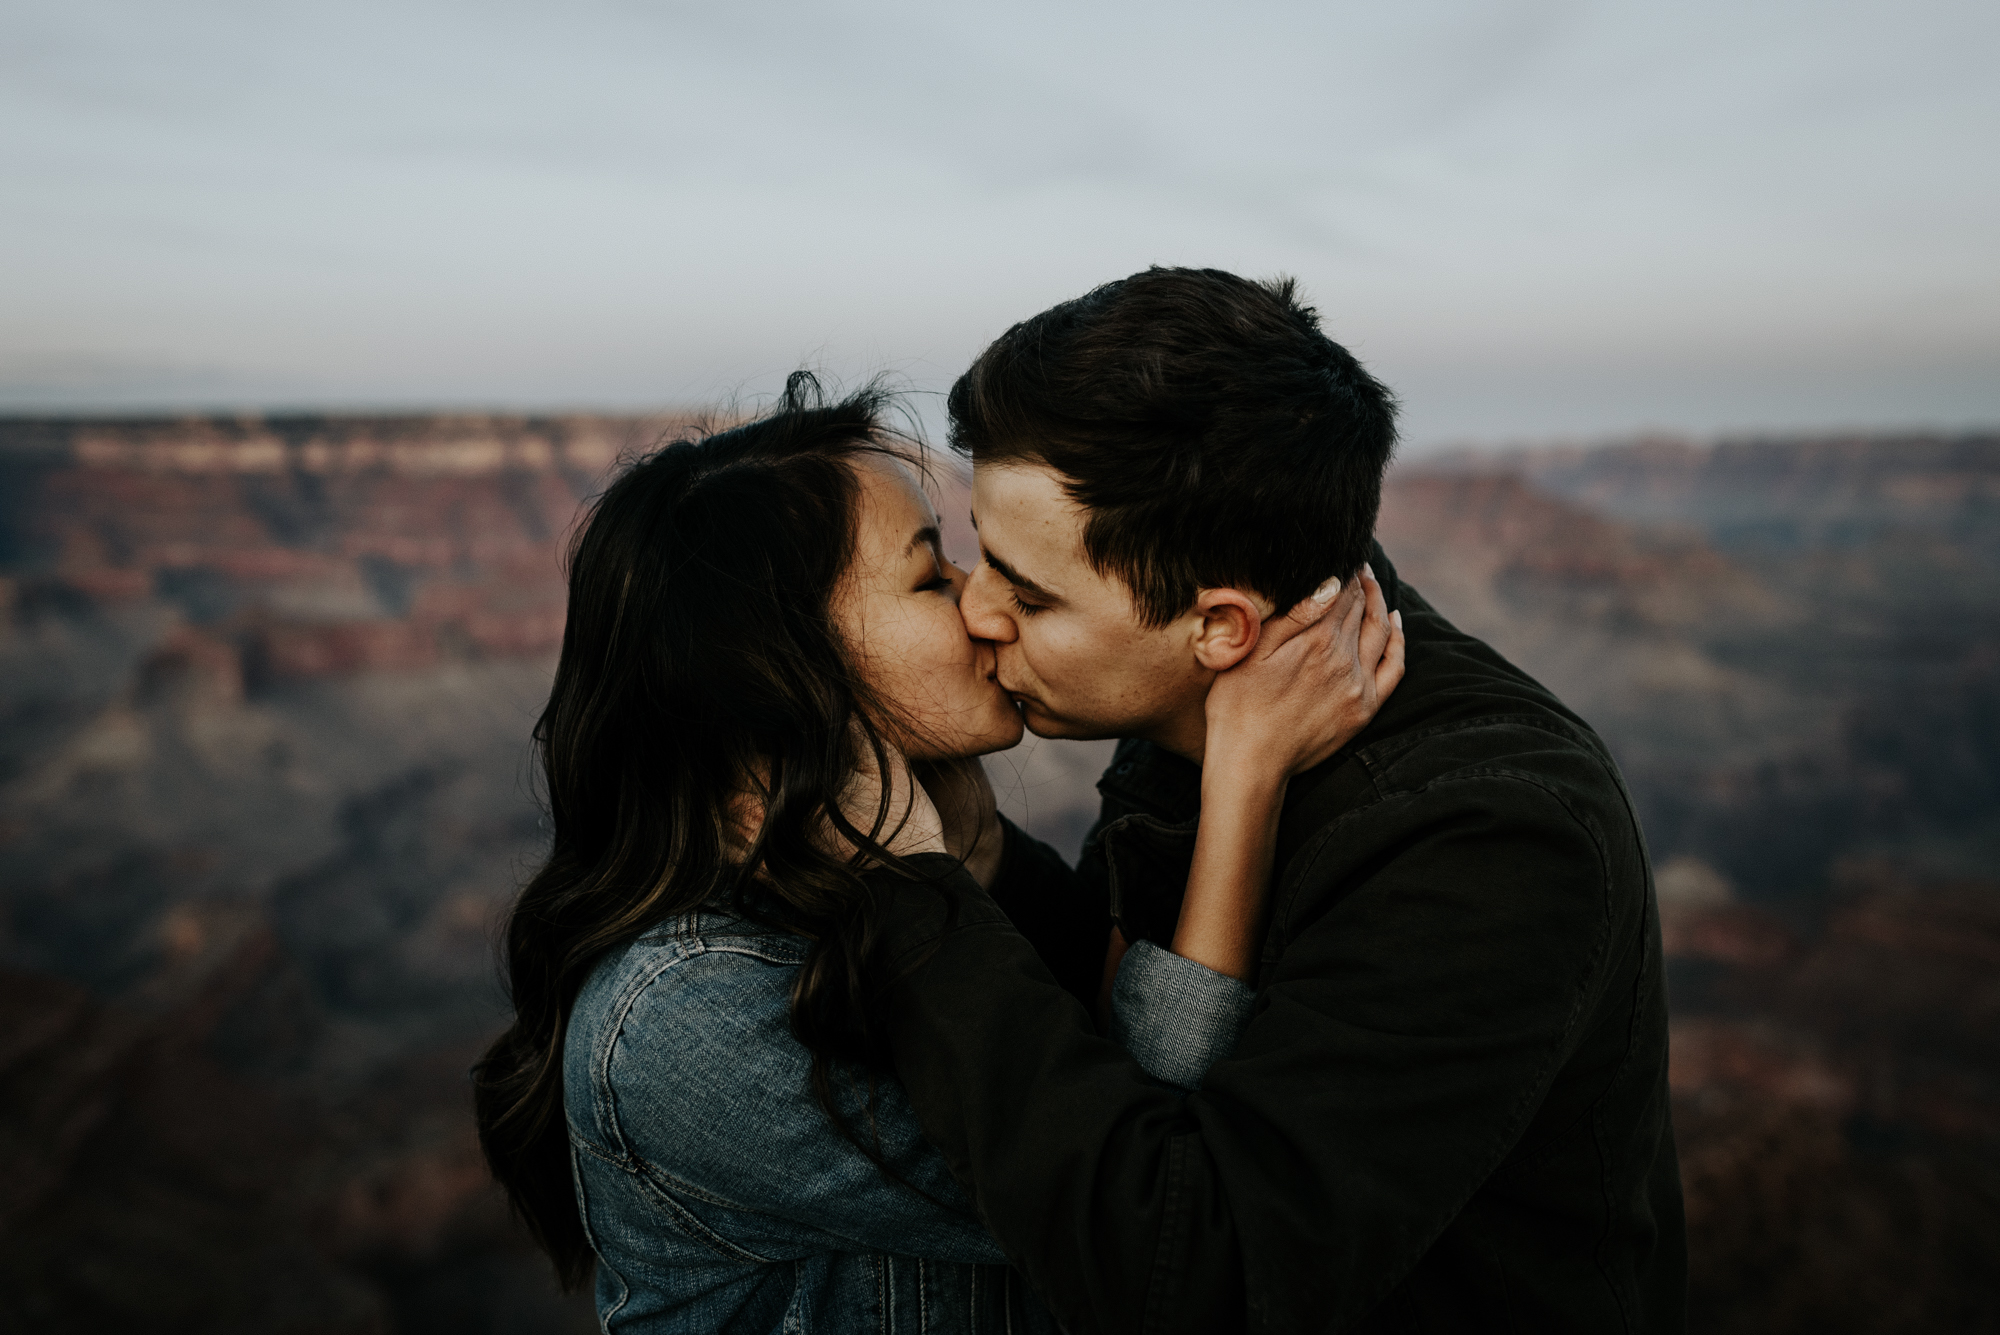 Couples Adventure Photography, Adventure Engagement Session at Grand Canyon National ParkCouples Adventure Photography, Adventure Engagement Session at Grand Canyon National Park